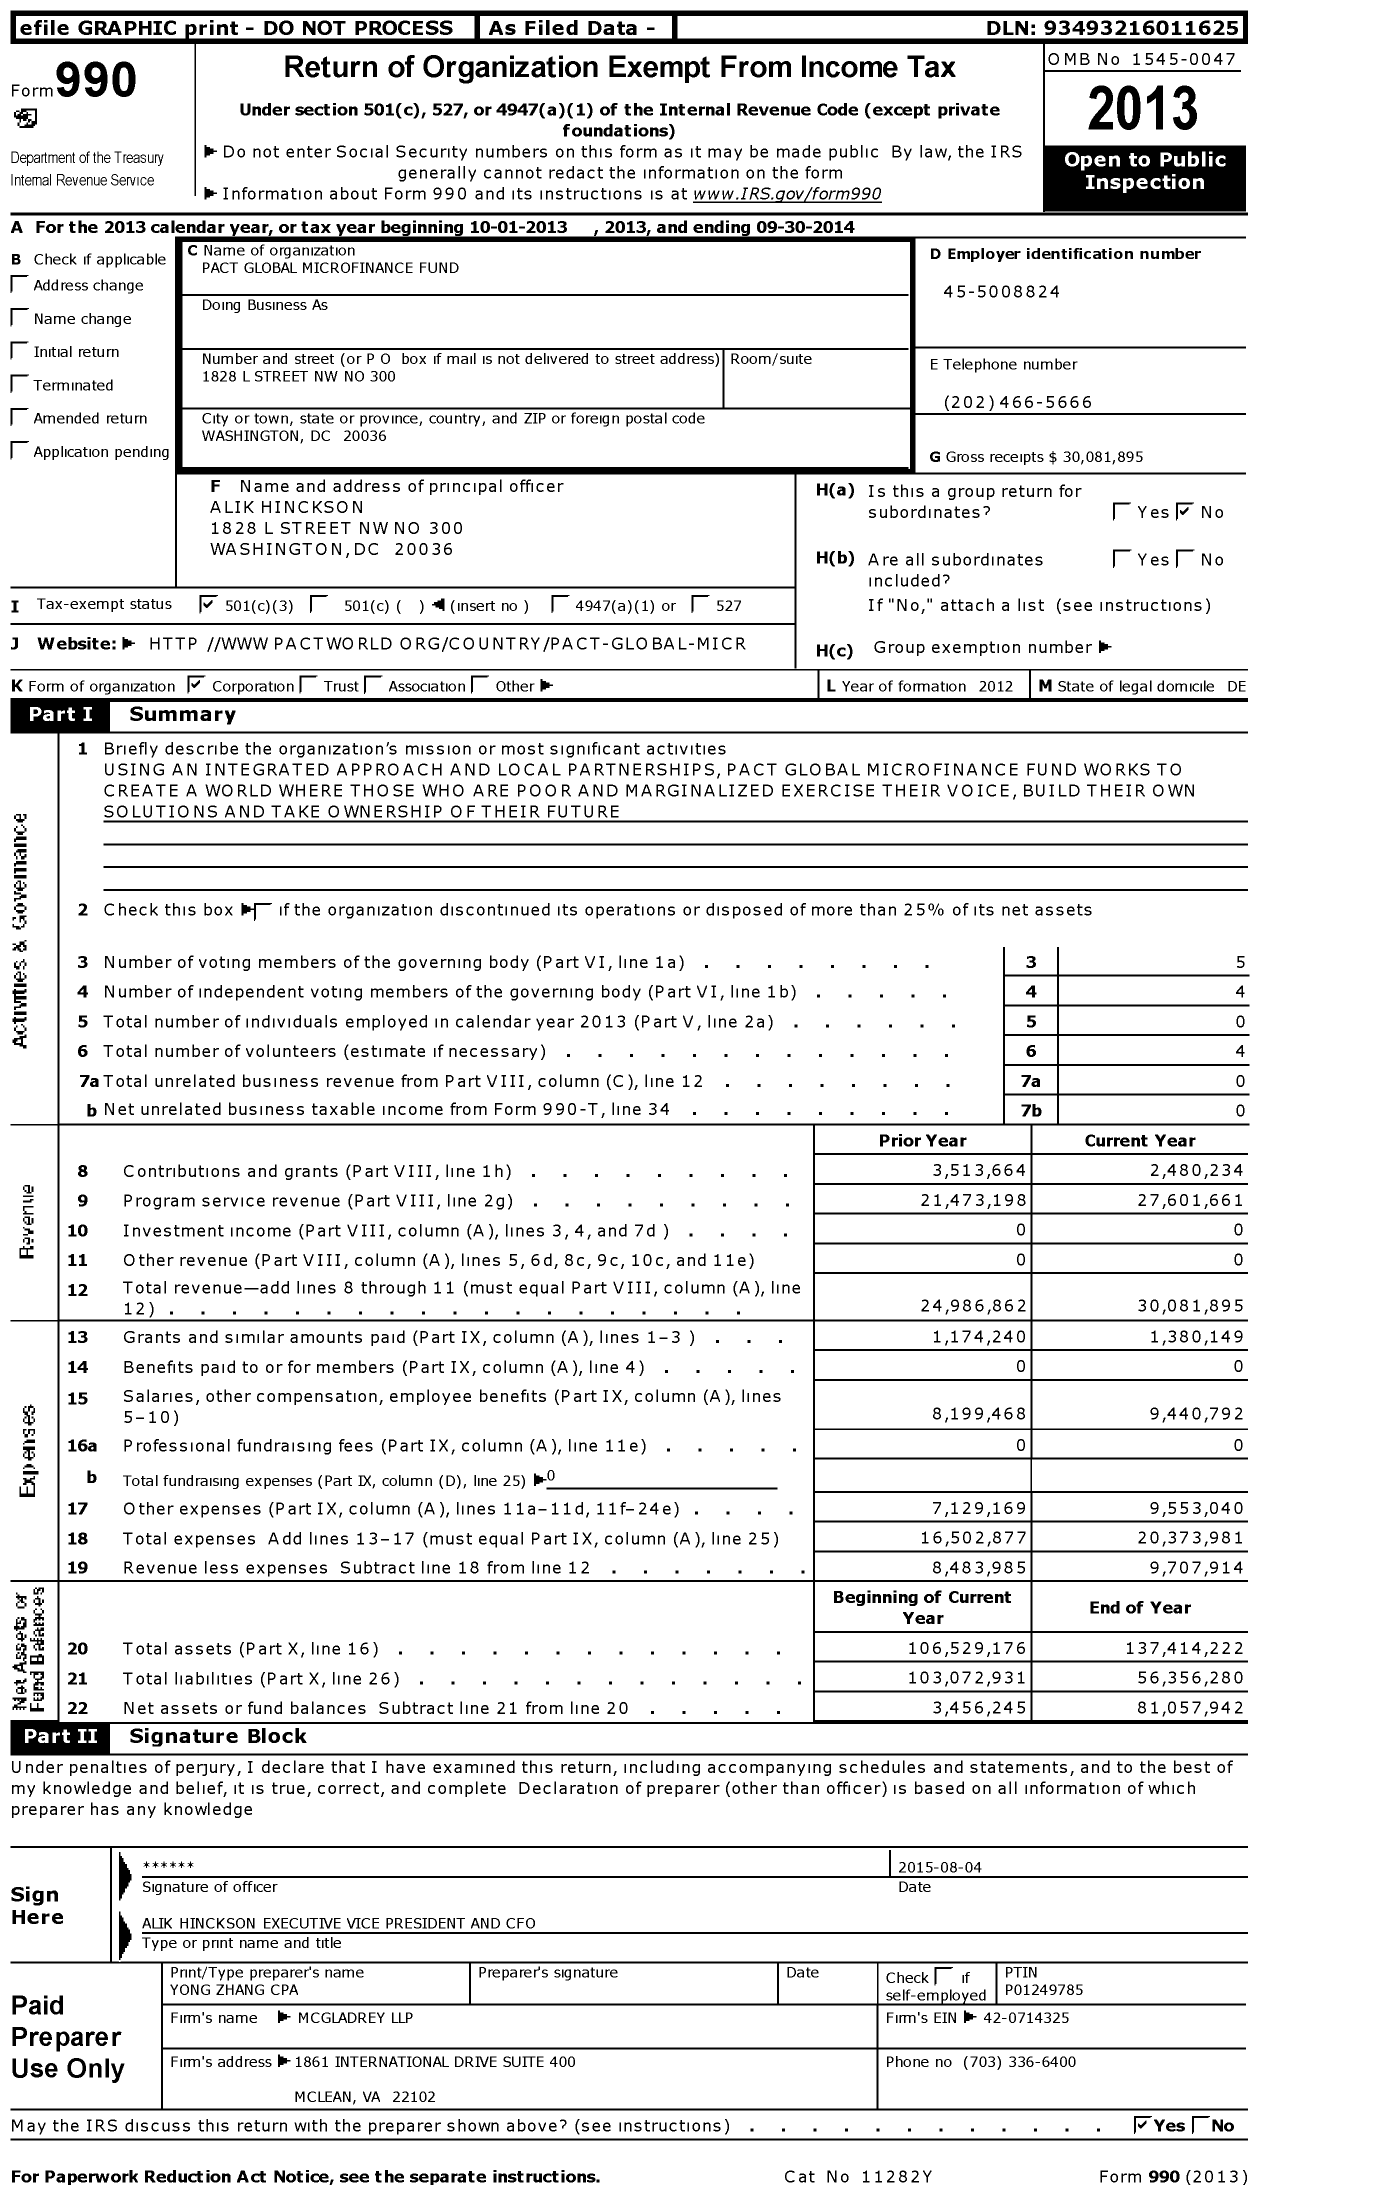 Image of first page of 2013 Form 990 for Pact Global Microfinance Fund (PGMF)